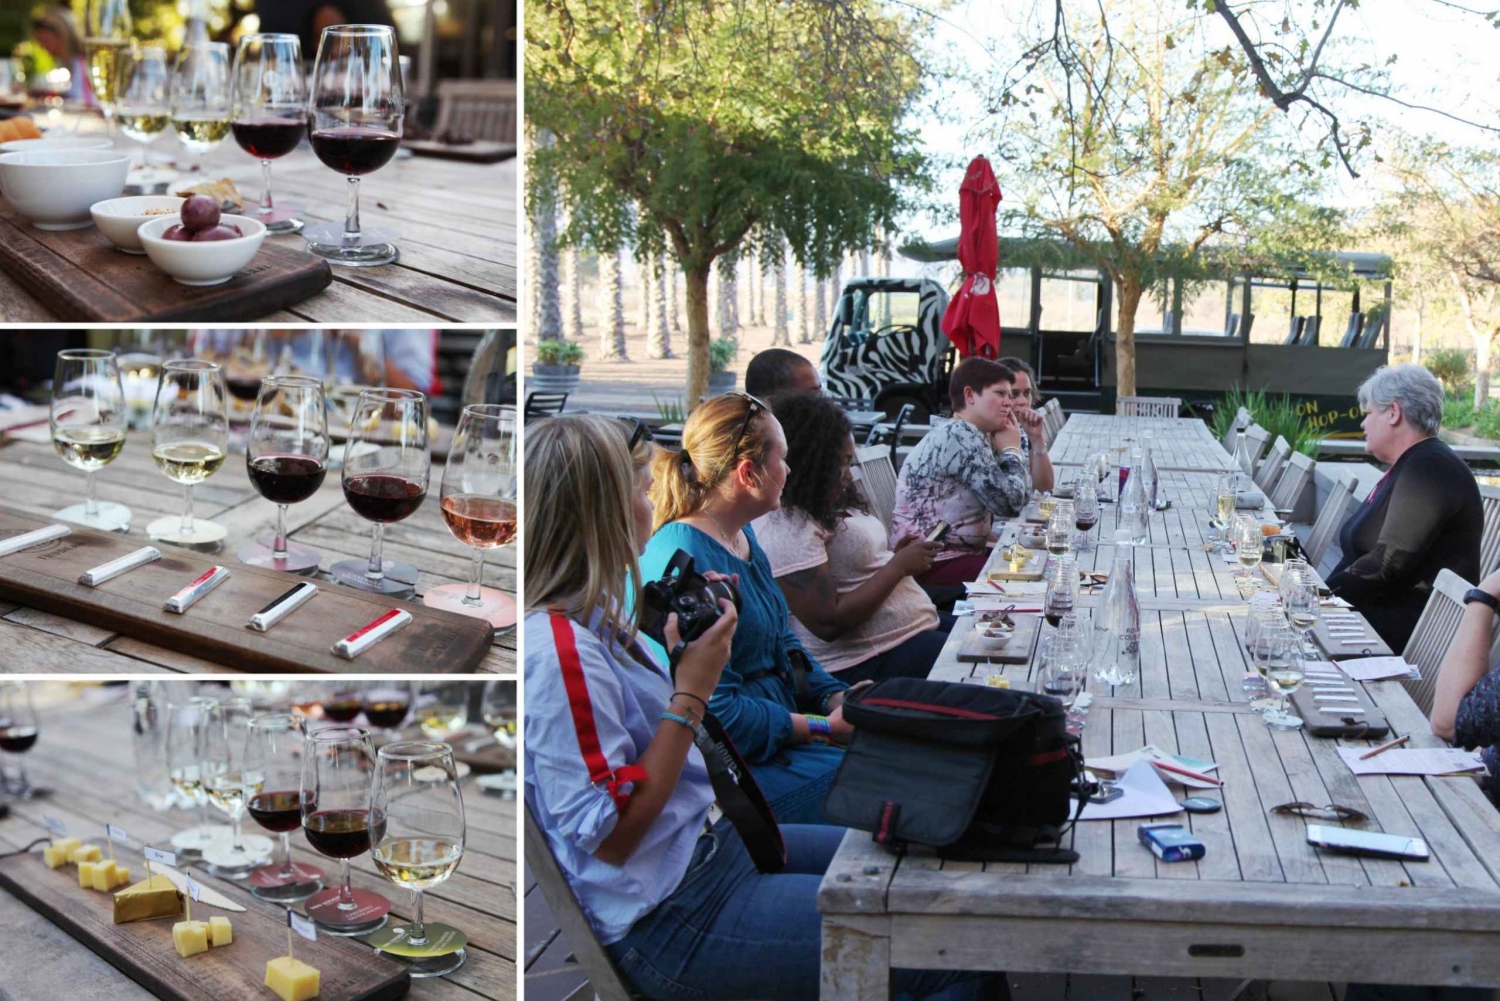 Robertson: Wine Appreciation Tour from Cape Town